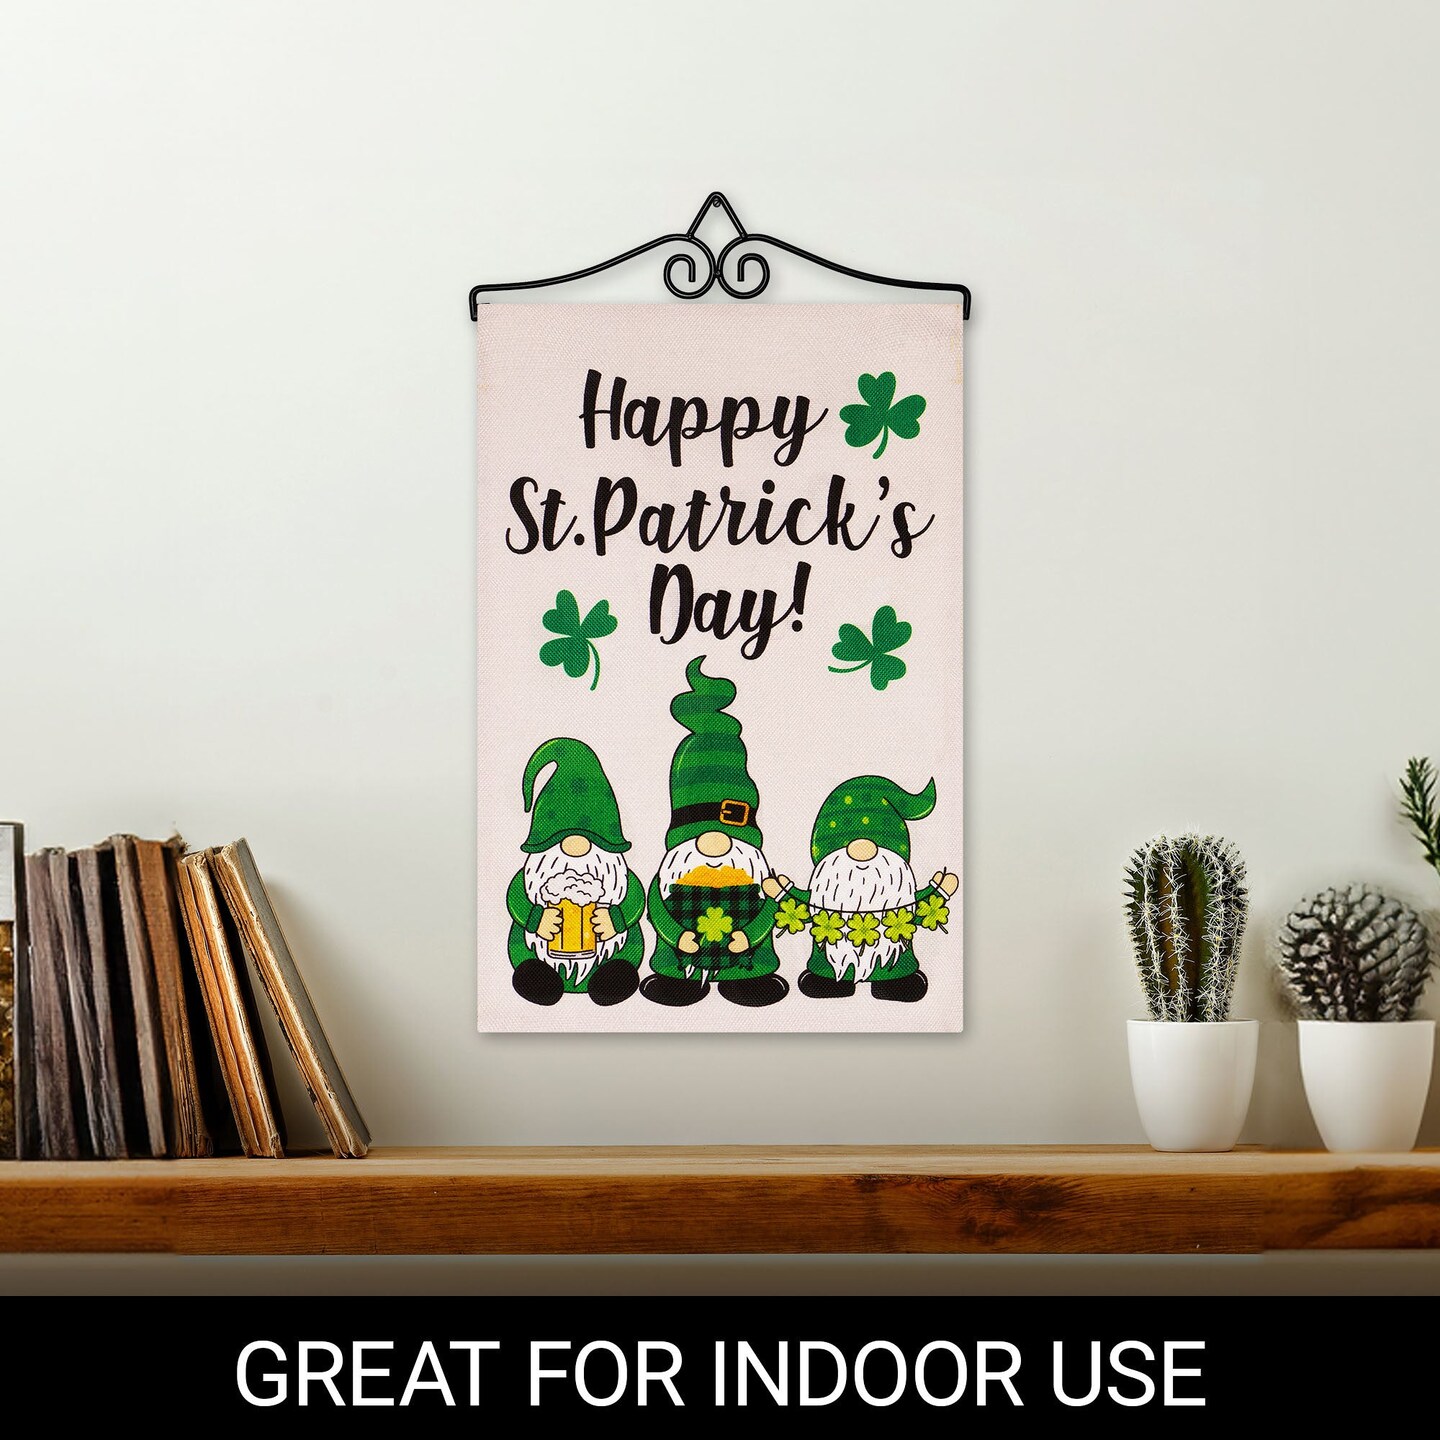 G128 Combo Pack Garden Flag Hanger 14IN &#x26; Garden Flag Happy St. Patrick&#x27;s Day 3 Leprechaun Gnomes 12x18IN Printed Double Sided Burlap Fabric